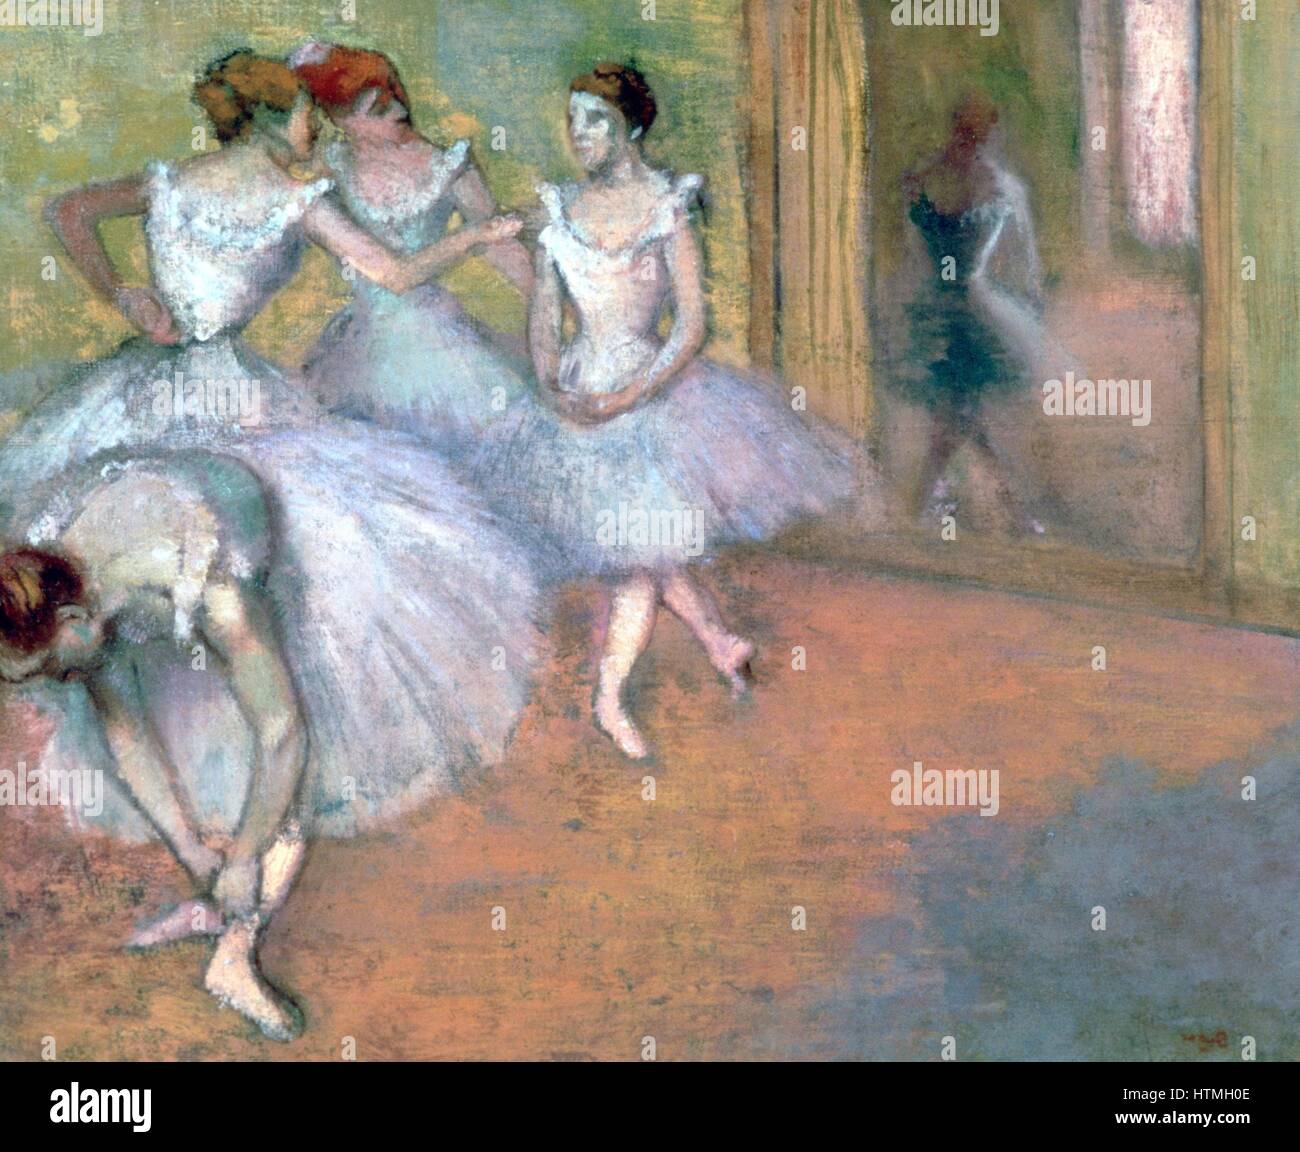 Four Dancers in the Foyer': Members of the corps de ballet in tutus chatting. Edgar Degas (1834-1917). French Impressionist painter. Stock Photo